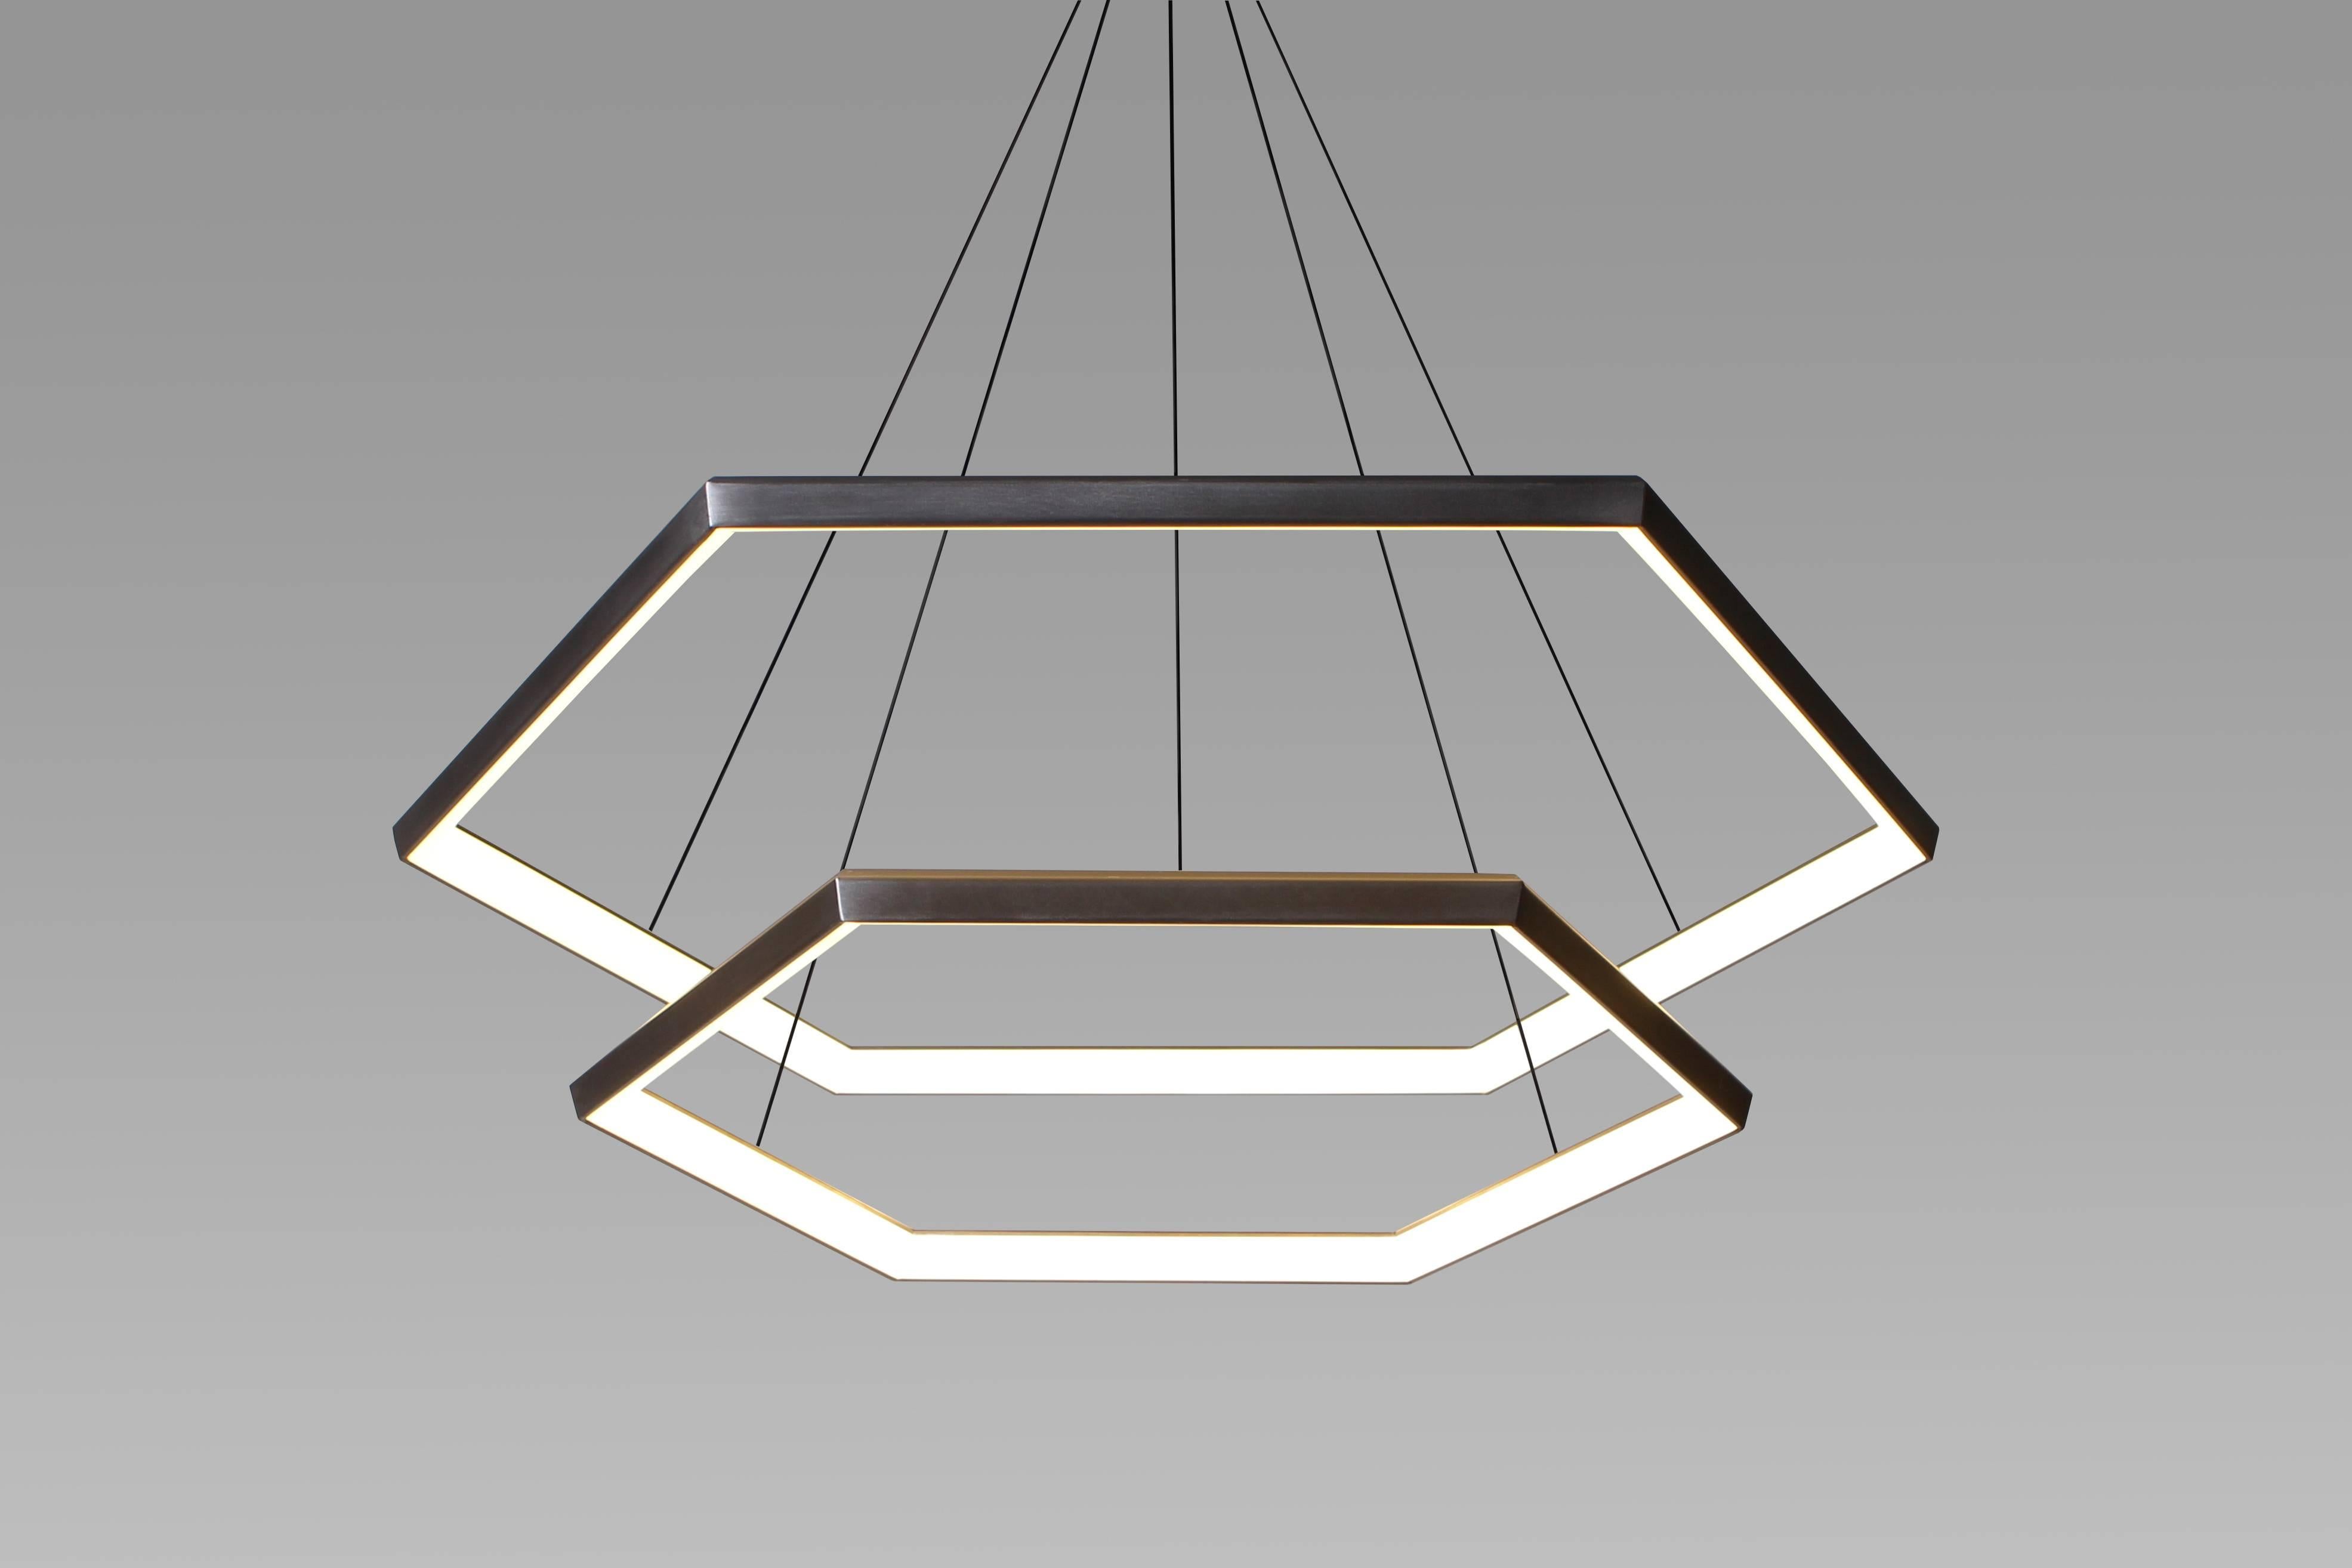 HEXIA CASCADE HXC46 is the beautiful meeting of the HEXIA line. Suspended effortlessly one above the other, convex hexagonal forms create a sleek and modern chandelier.

Metal Finish
Powder-coat finishes available in Metallic Gold Powder-coat,